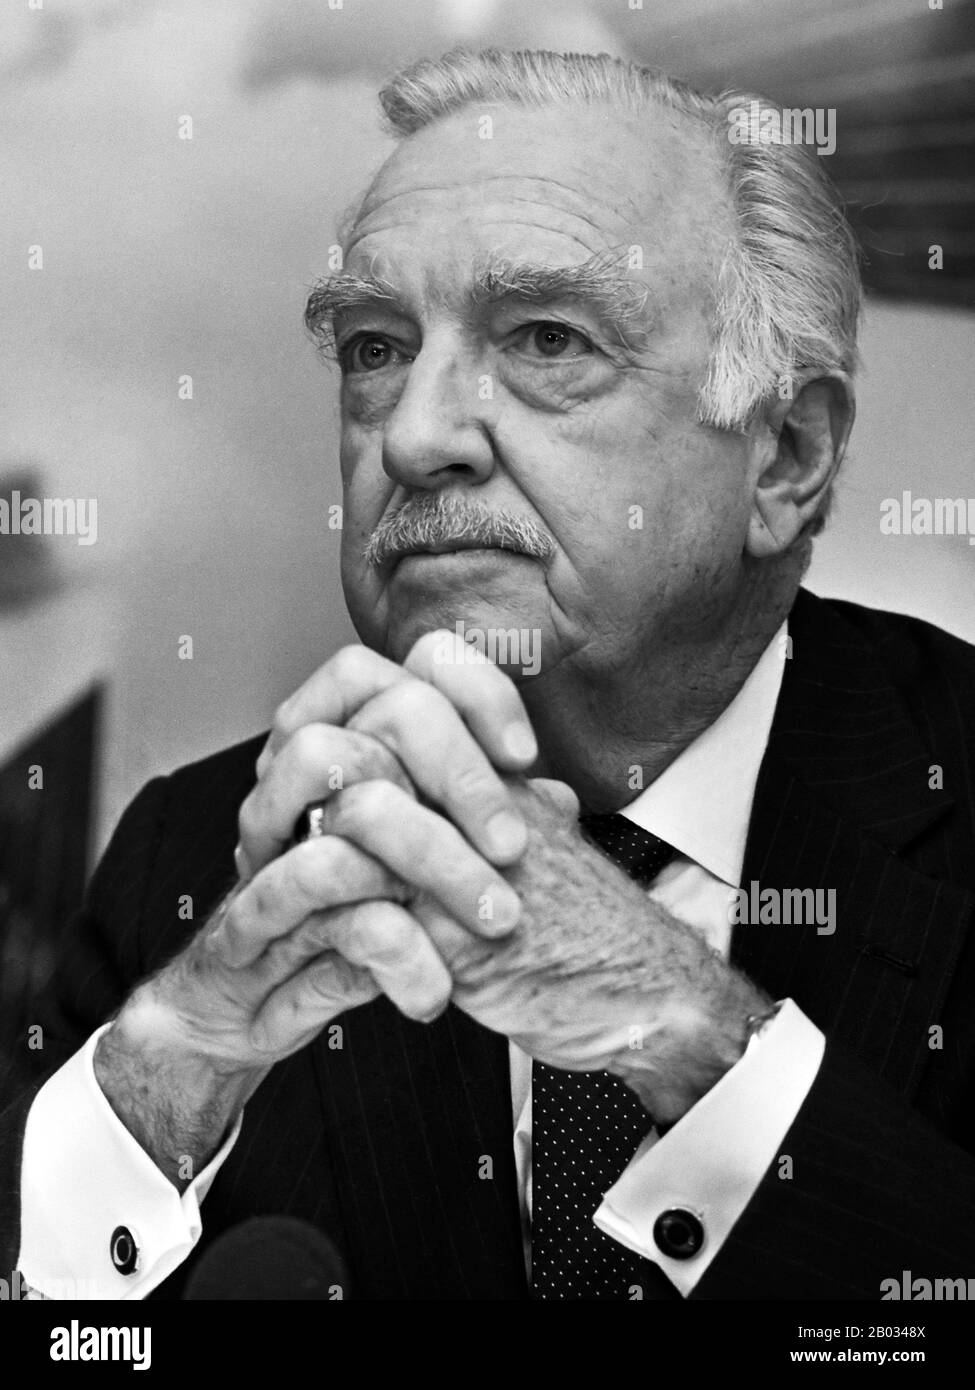 Walter Leland Cronkite, Jr. (November 4, 1916 – July 17, 2009) was an American broadcast journalist, best known as anchorman for the CBS Evening News for 19 years (1962–81).  He reported many events from 1937 to 1981, including bombings in World War II; the Nuremberg trials; combat in the Vietnam War; the Dawson's Field hijackings; Watergate; the Iran Hostage Crisis; and the assassinations of President John F. Kennedy, civil rights pioneer Martin Luther King, Jr., and Beatles musician John Lennon. Stock Photo